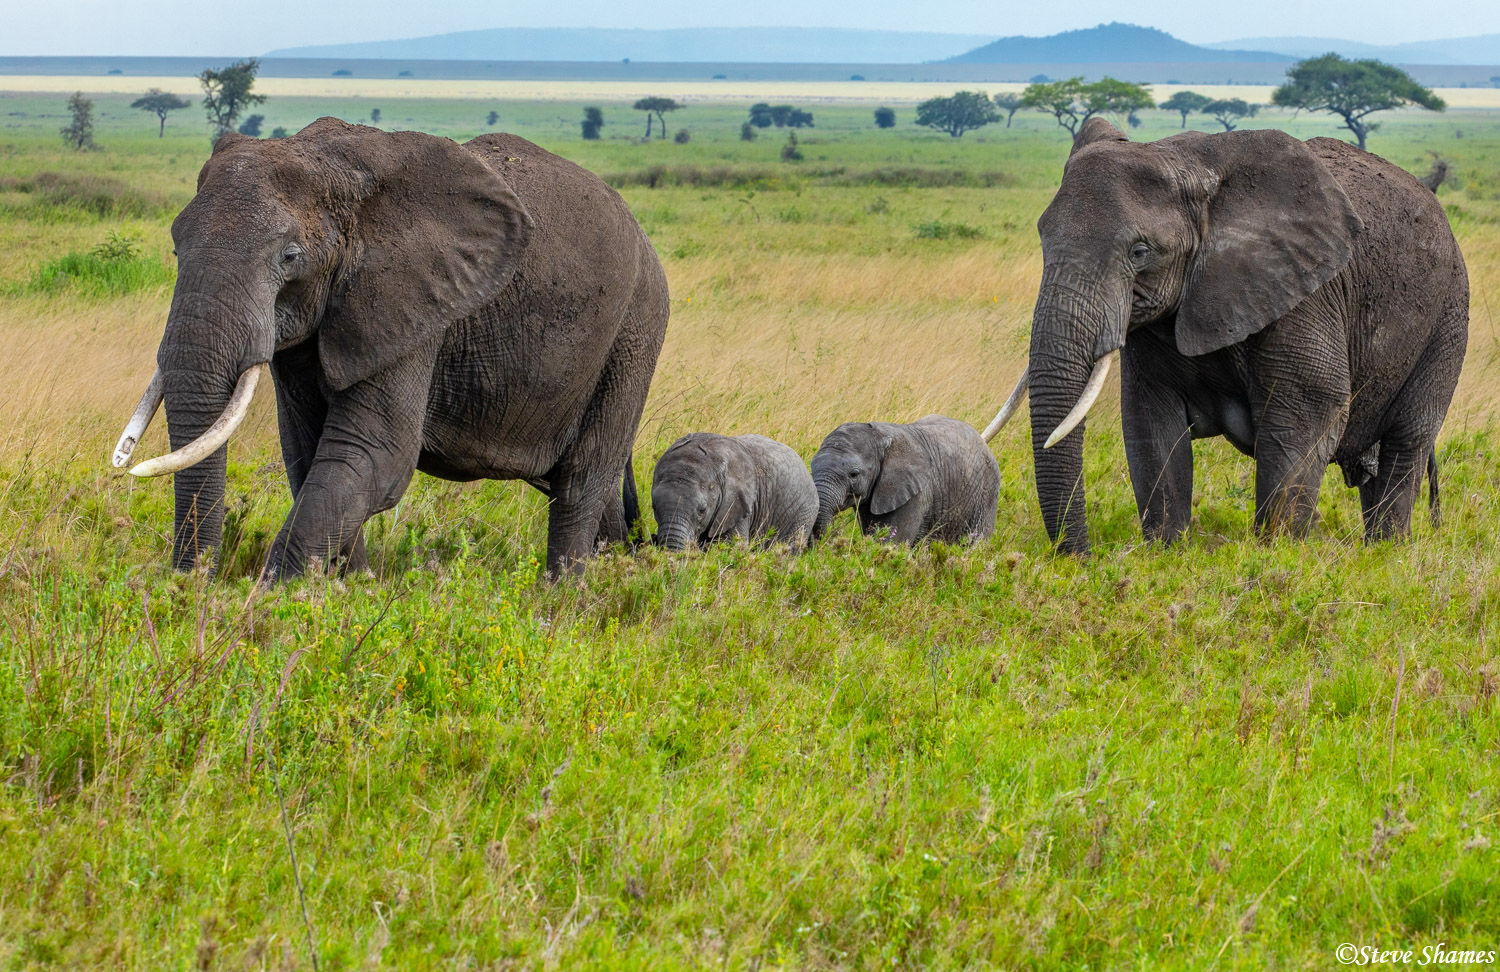 Mother elephants escorting the young calves.